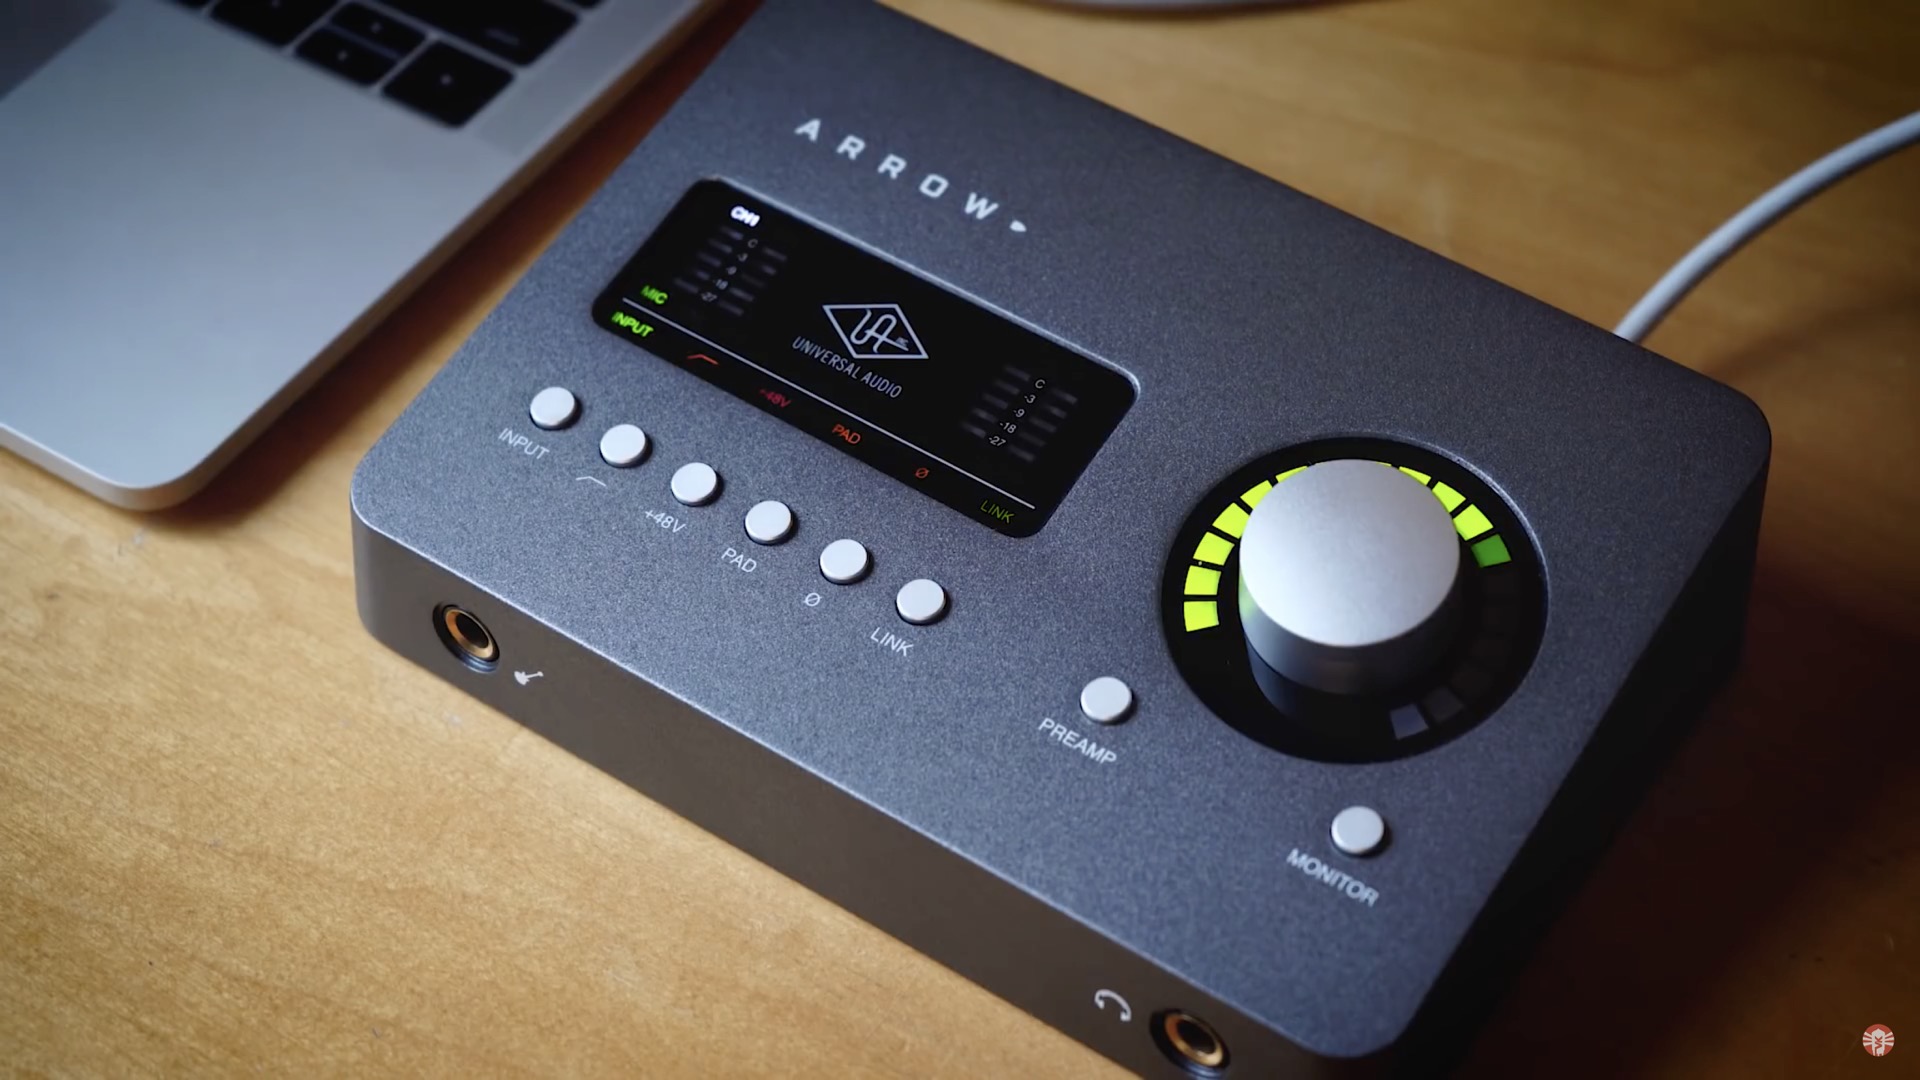 Universal Audio launches new $499 bus-powered Arrow interface with 